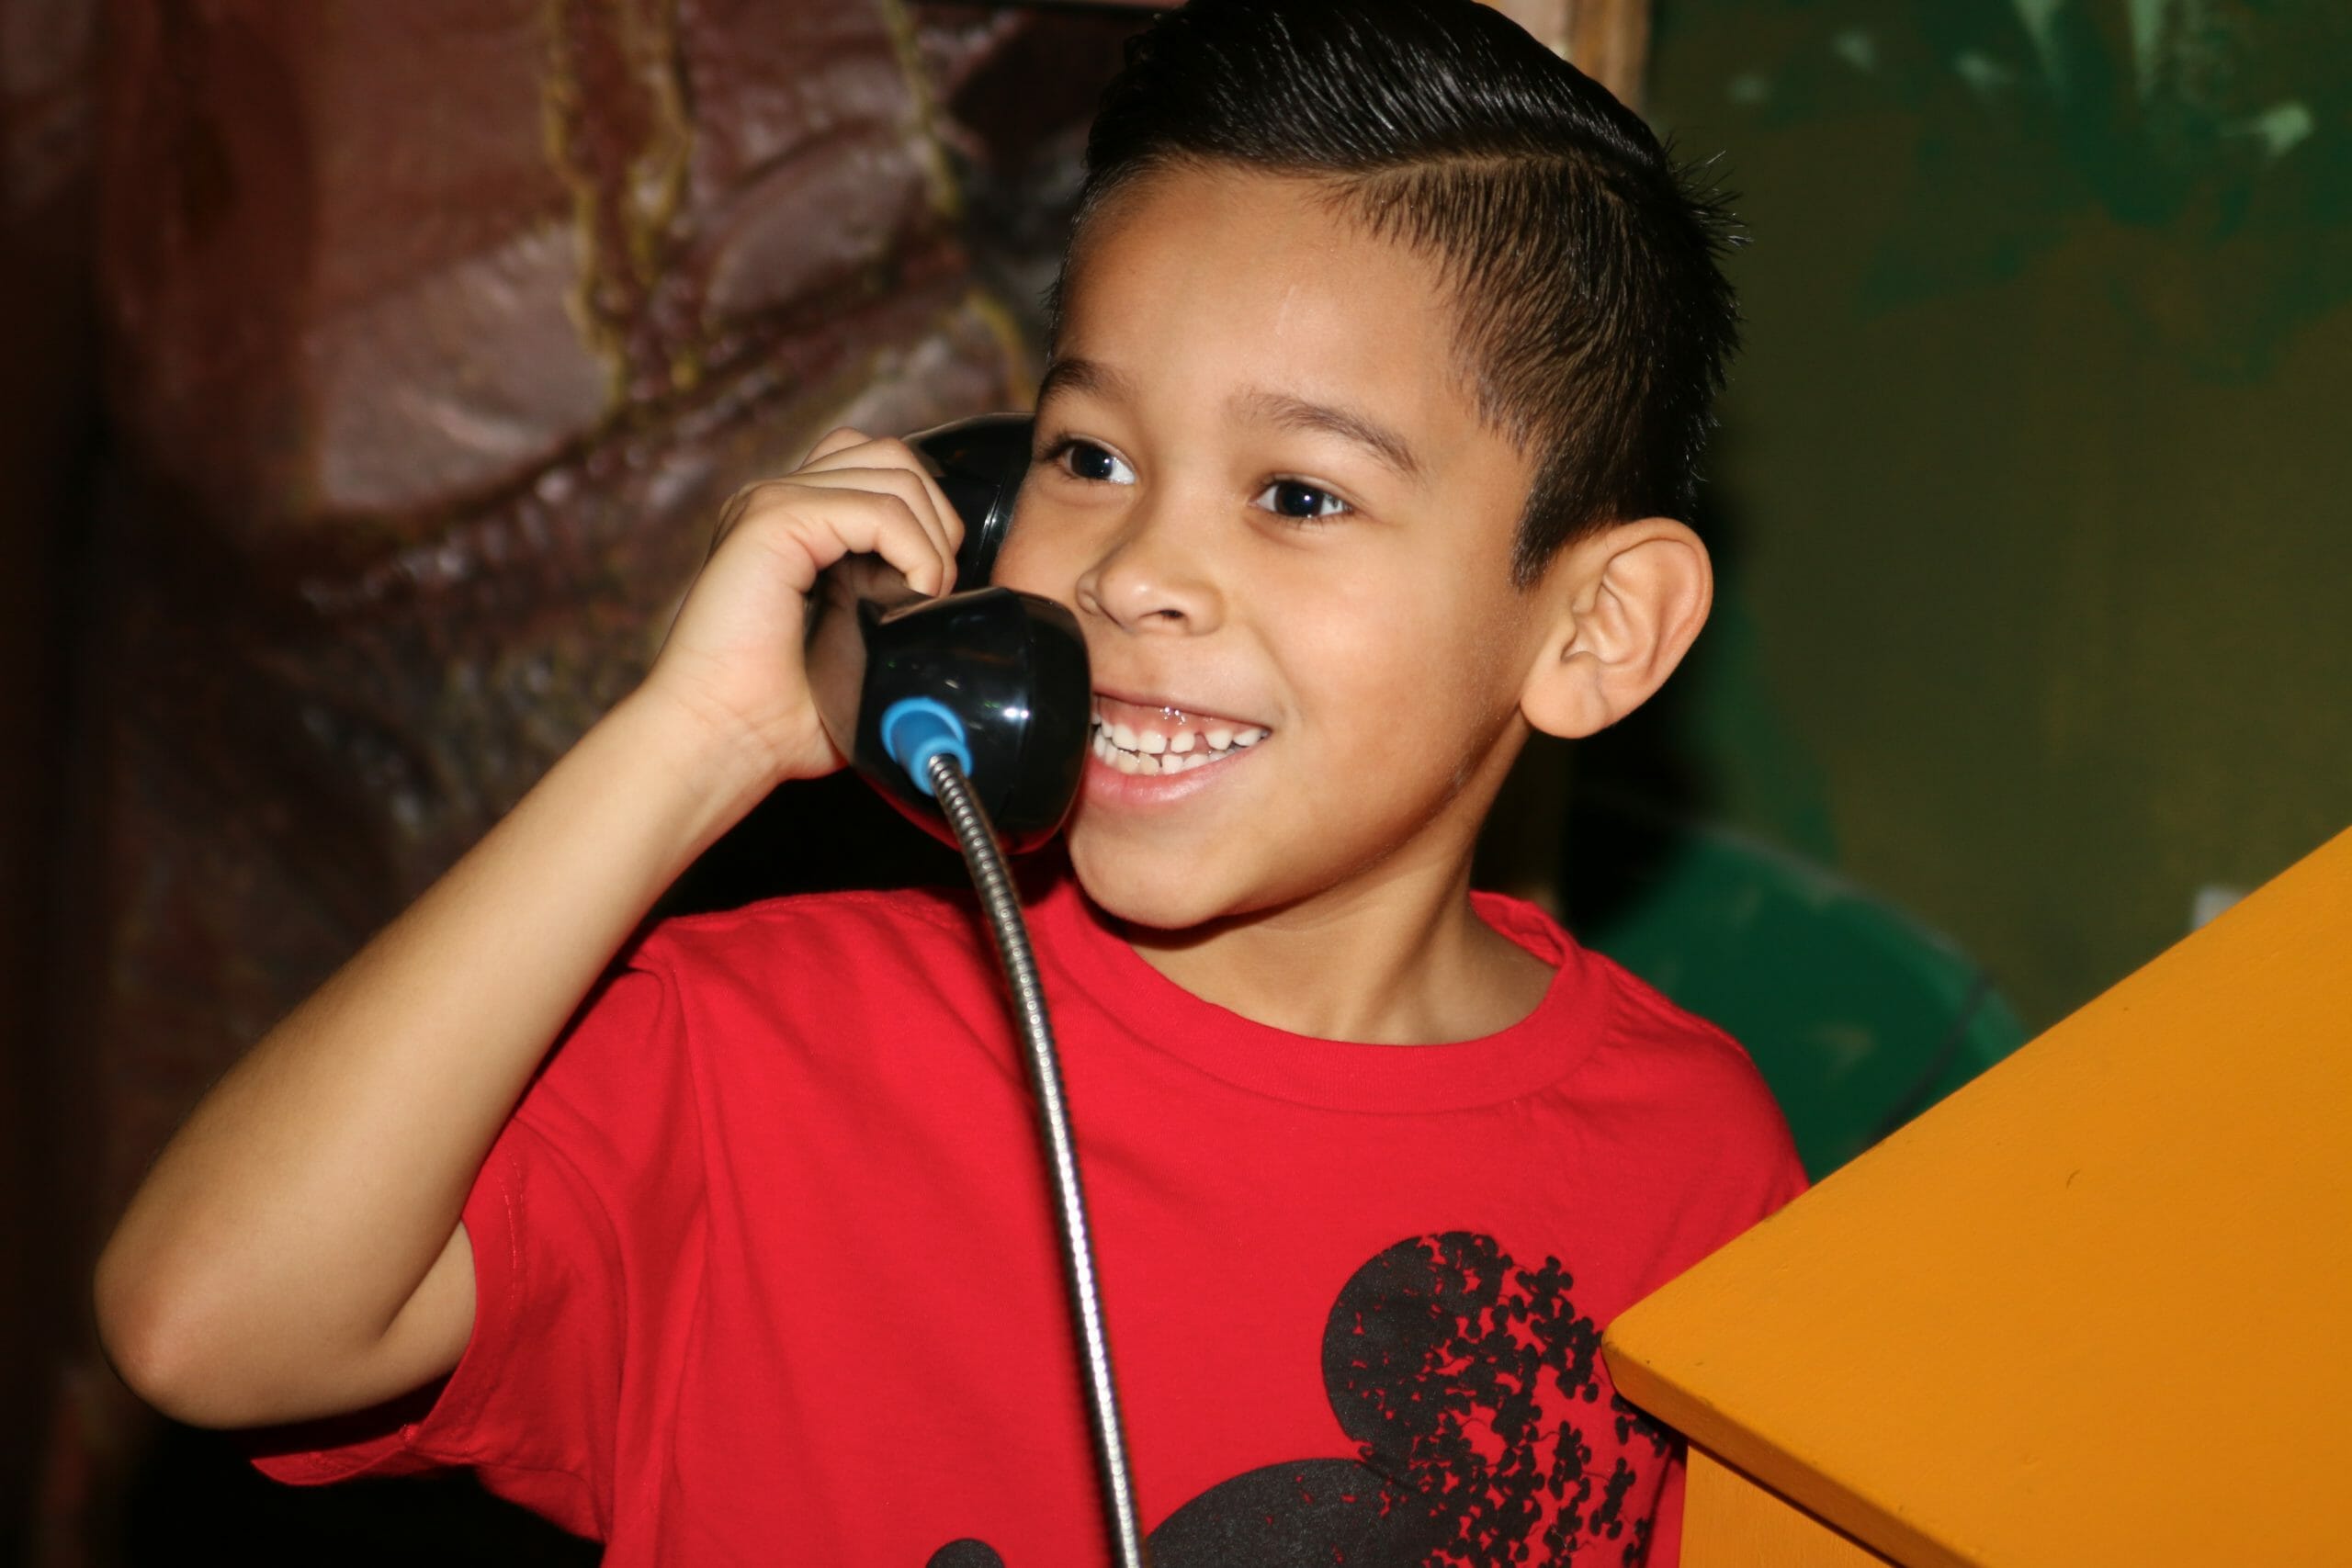 Child smiling while talking on the phone in Great Explorations exhibit.